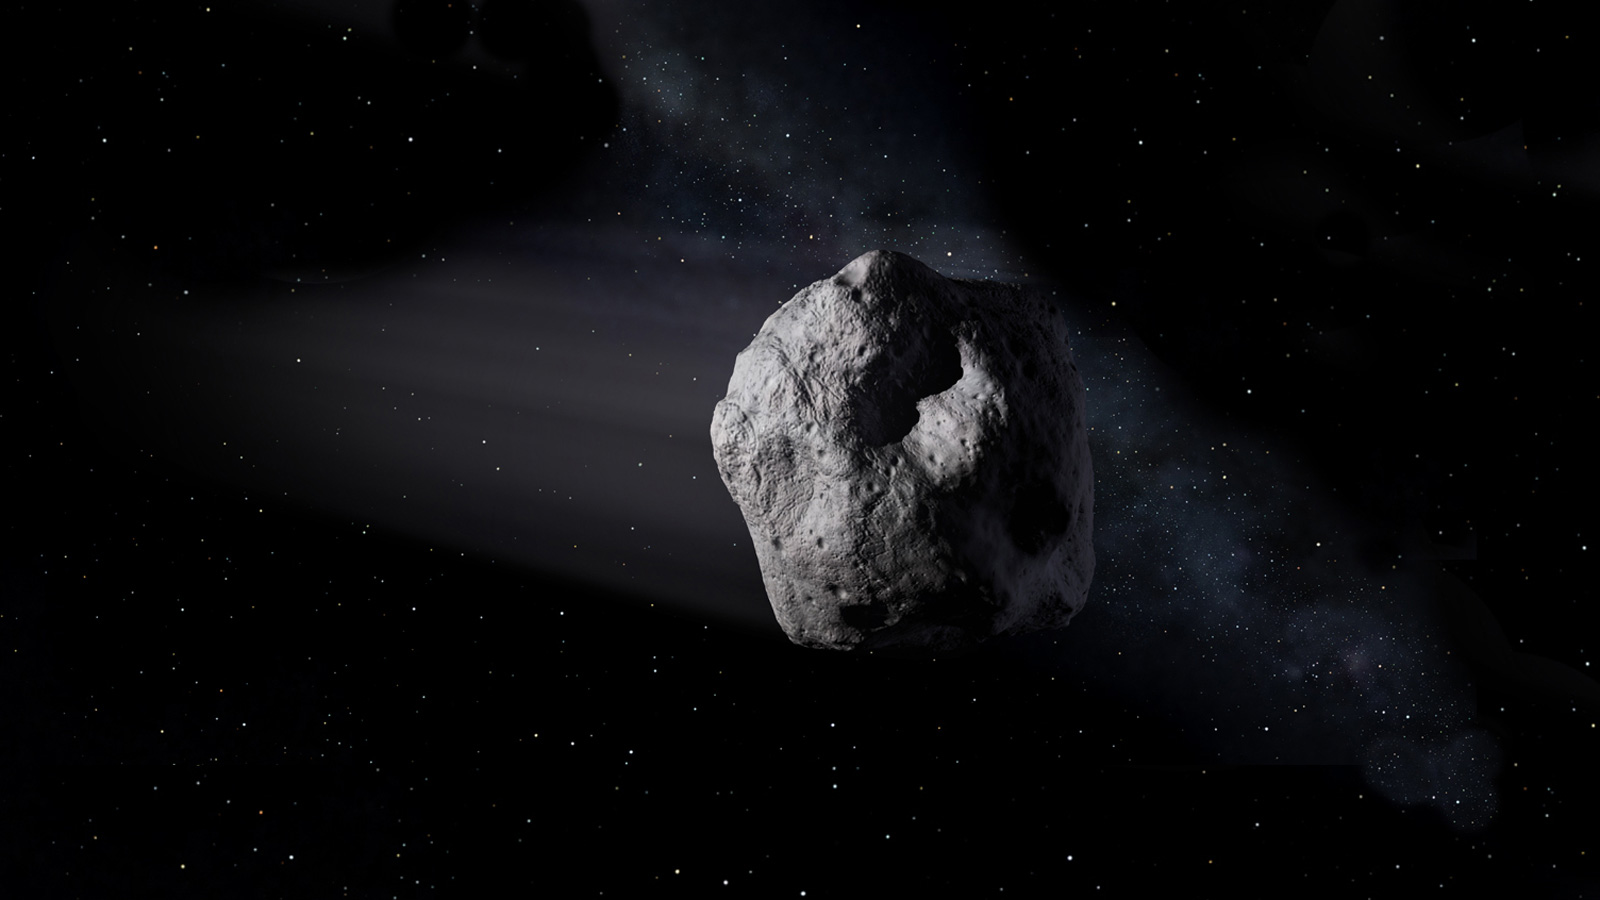 Illustration shows a near-Earth asteroid 